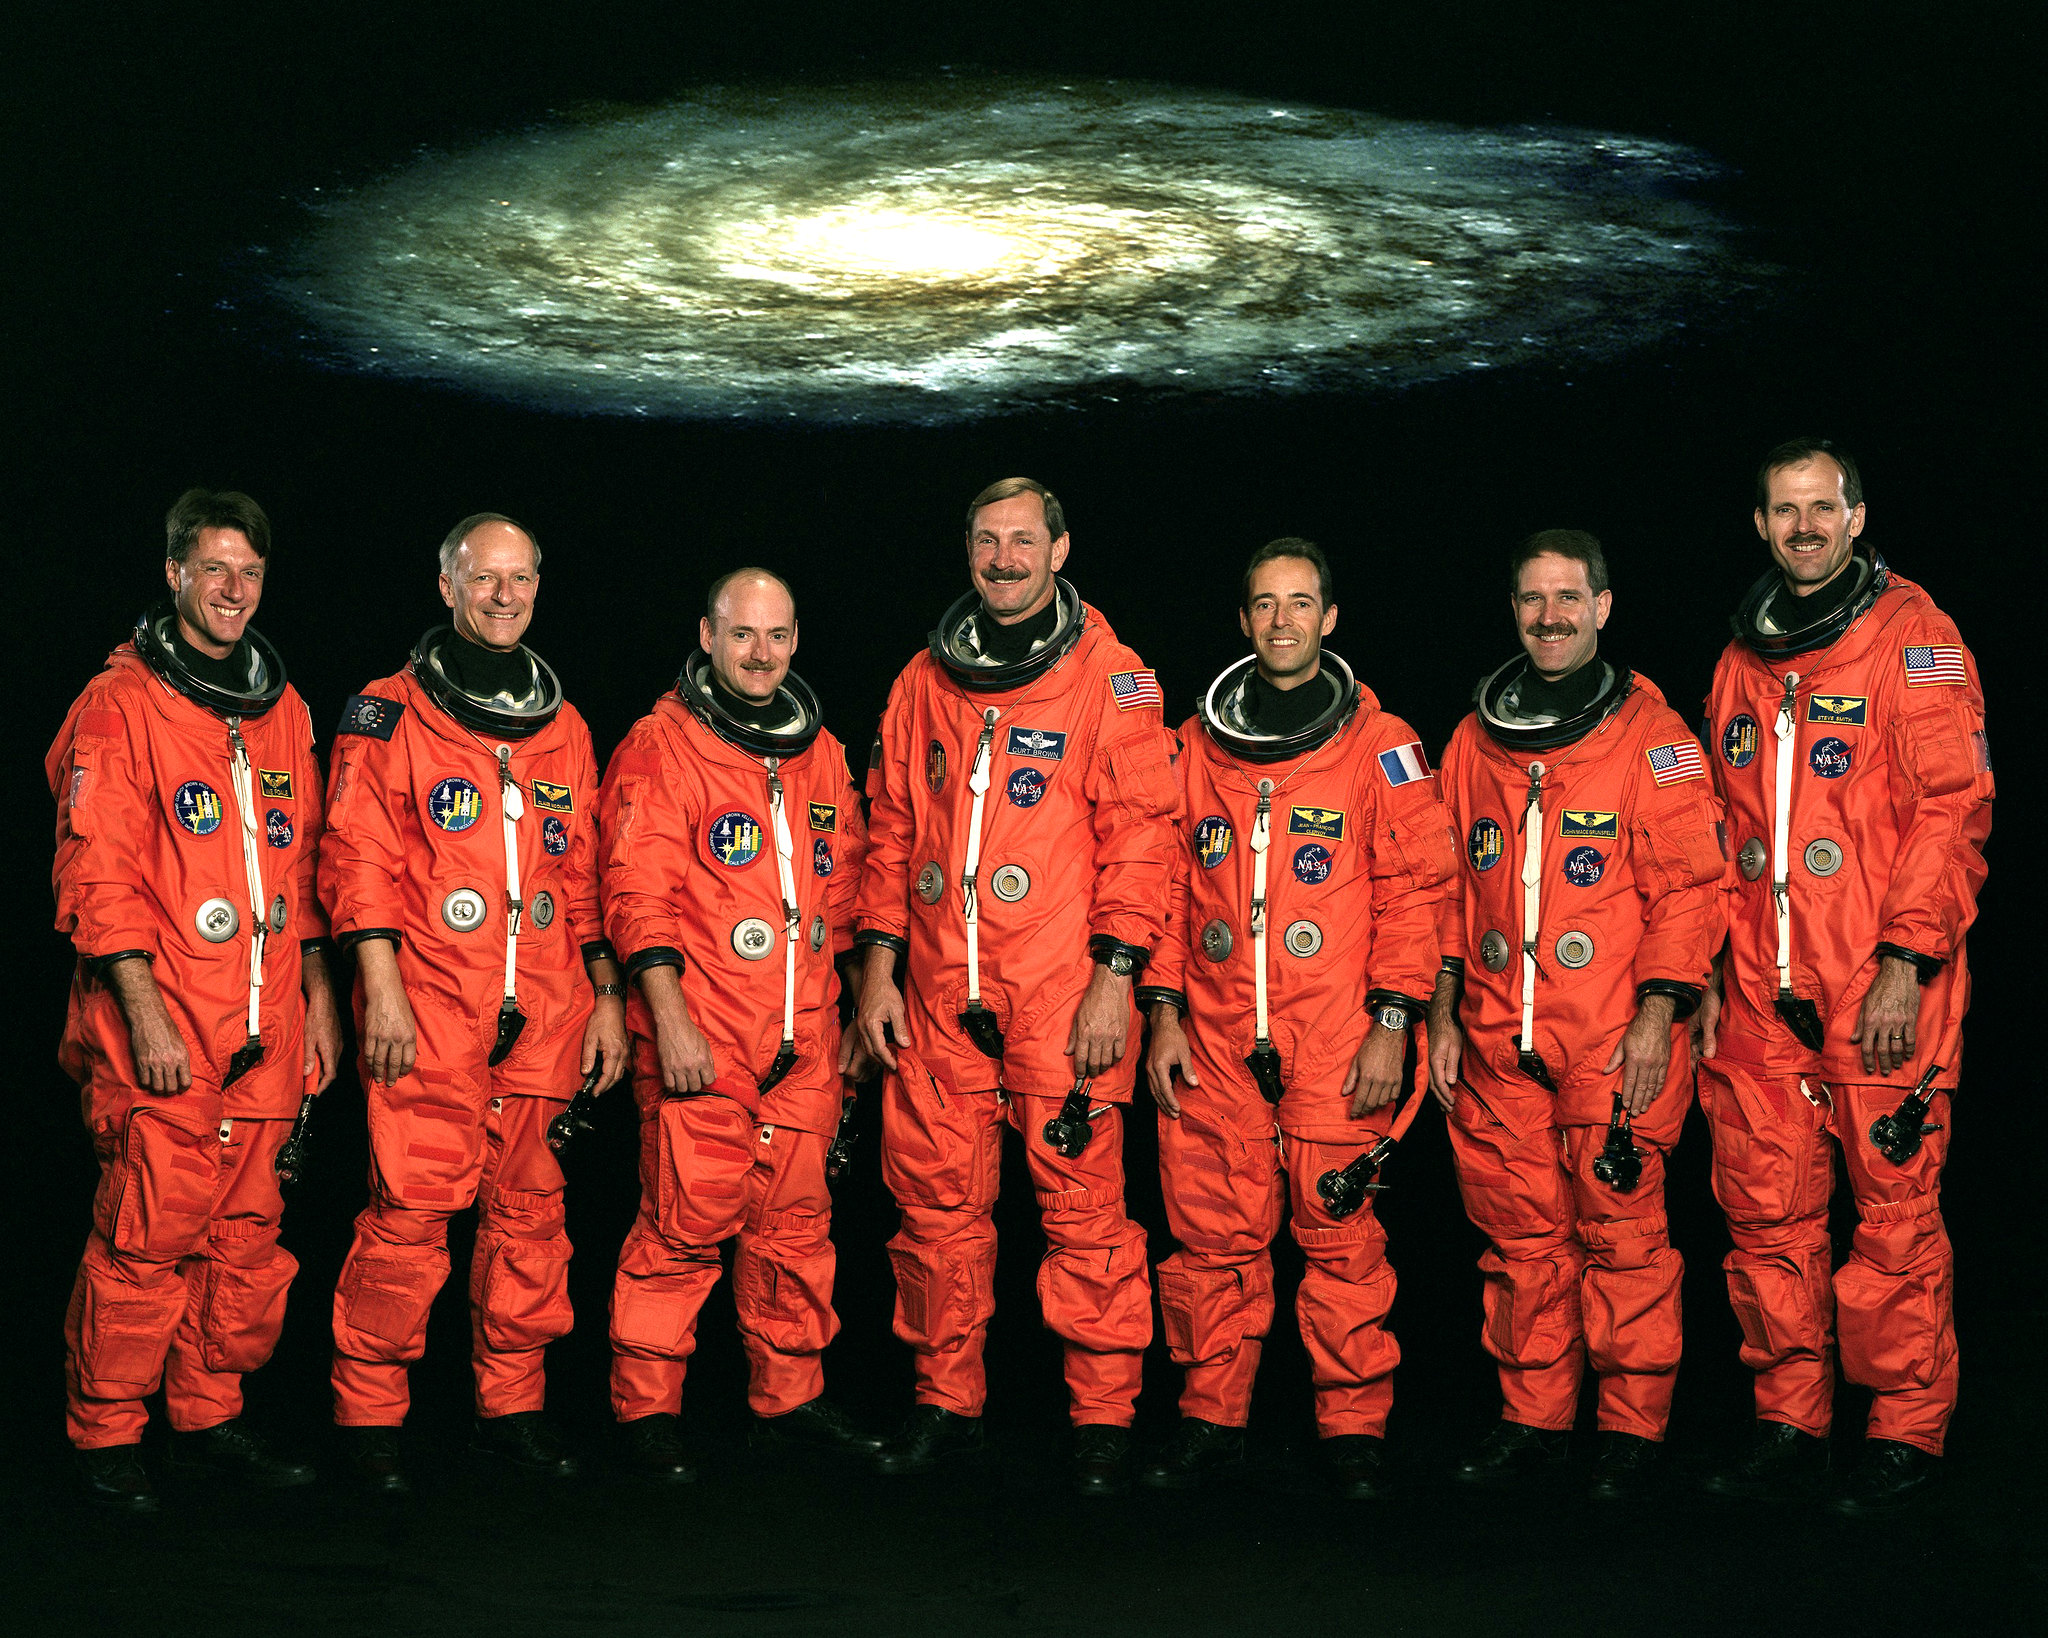 Seven men in flight suits, with no helmets, standing in front of a galaxy image